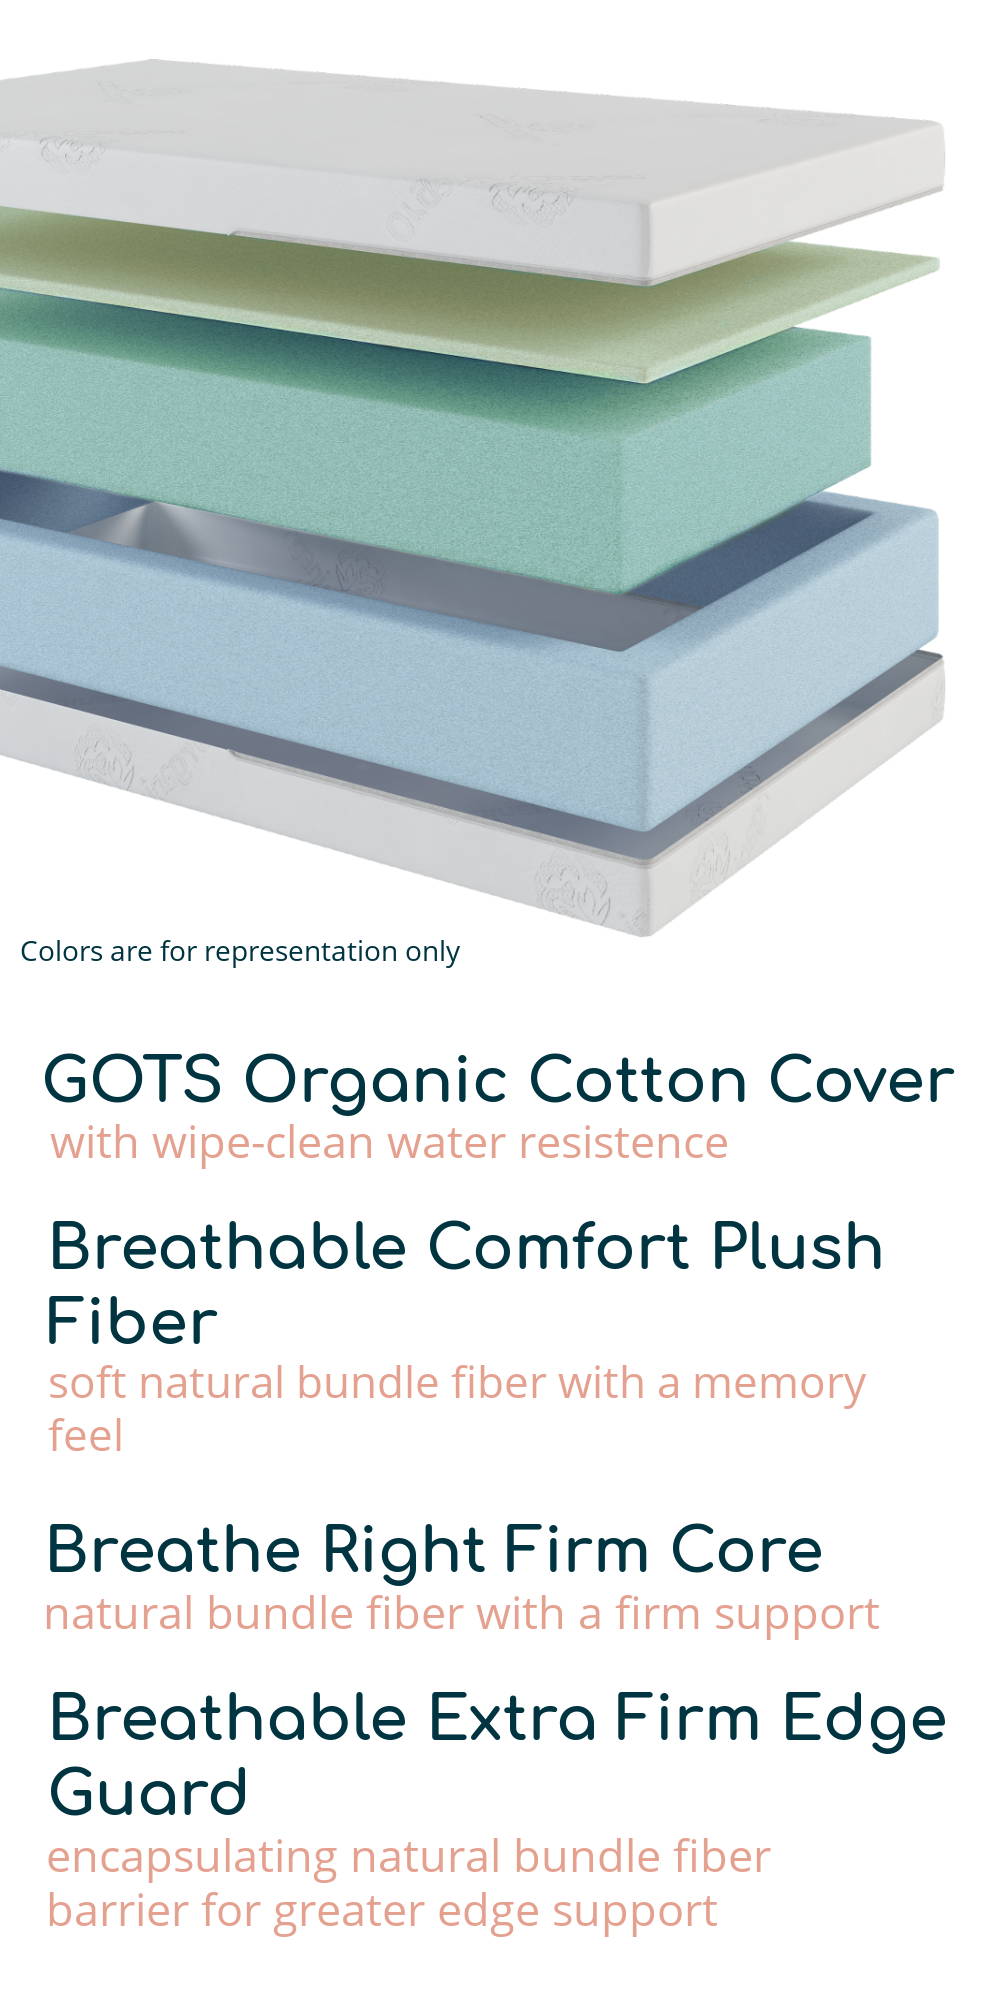 GOTS Organic Cotton Cover-with wipe clean resistance, Breathable Comfort Plush Fiber-soft natural bundle fiber with a memory feel, Breathe Right Firm Core-natural bundle fiber with a firm support, and Breathable Extra Firm Edge Guard-encapsulating natural bundle fiber barrier for greater edge support.